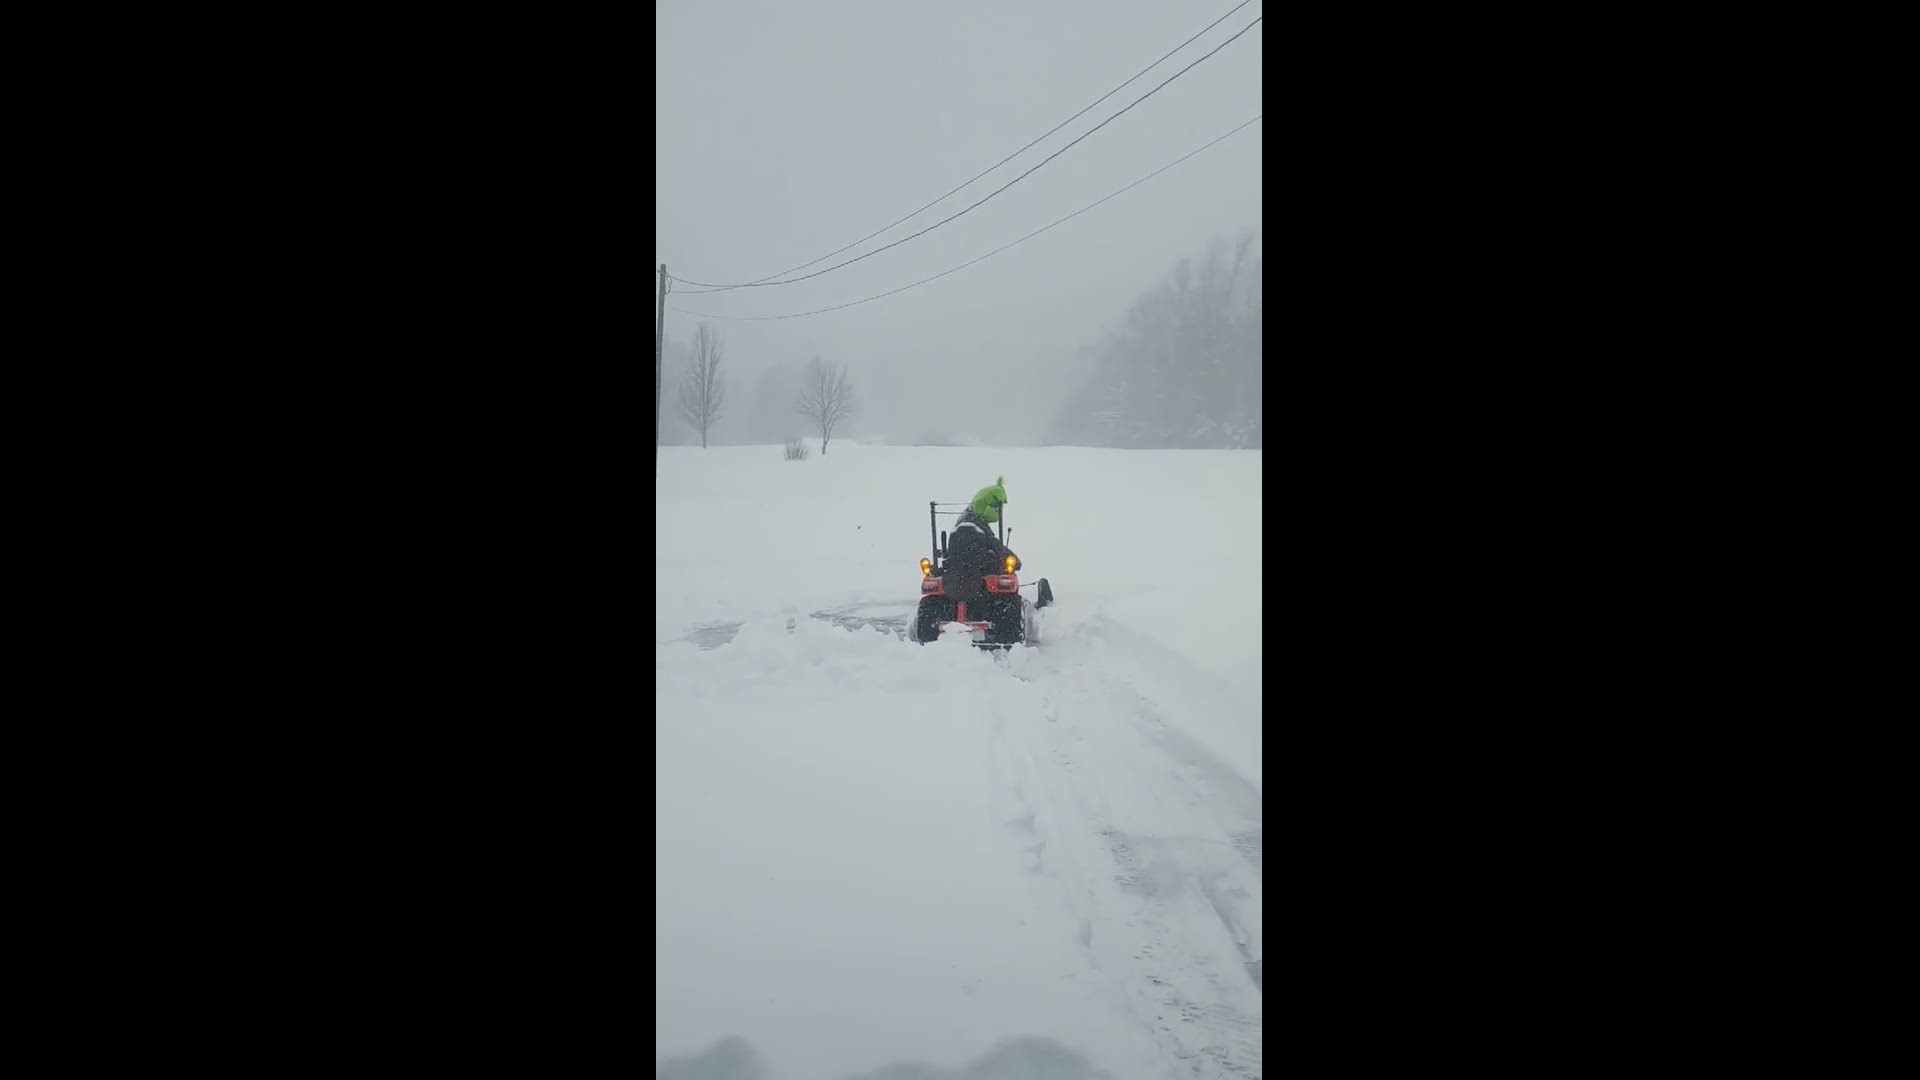 The Grinch was spotted plowing snow in Boone, N.C.